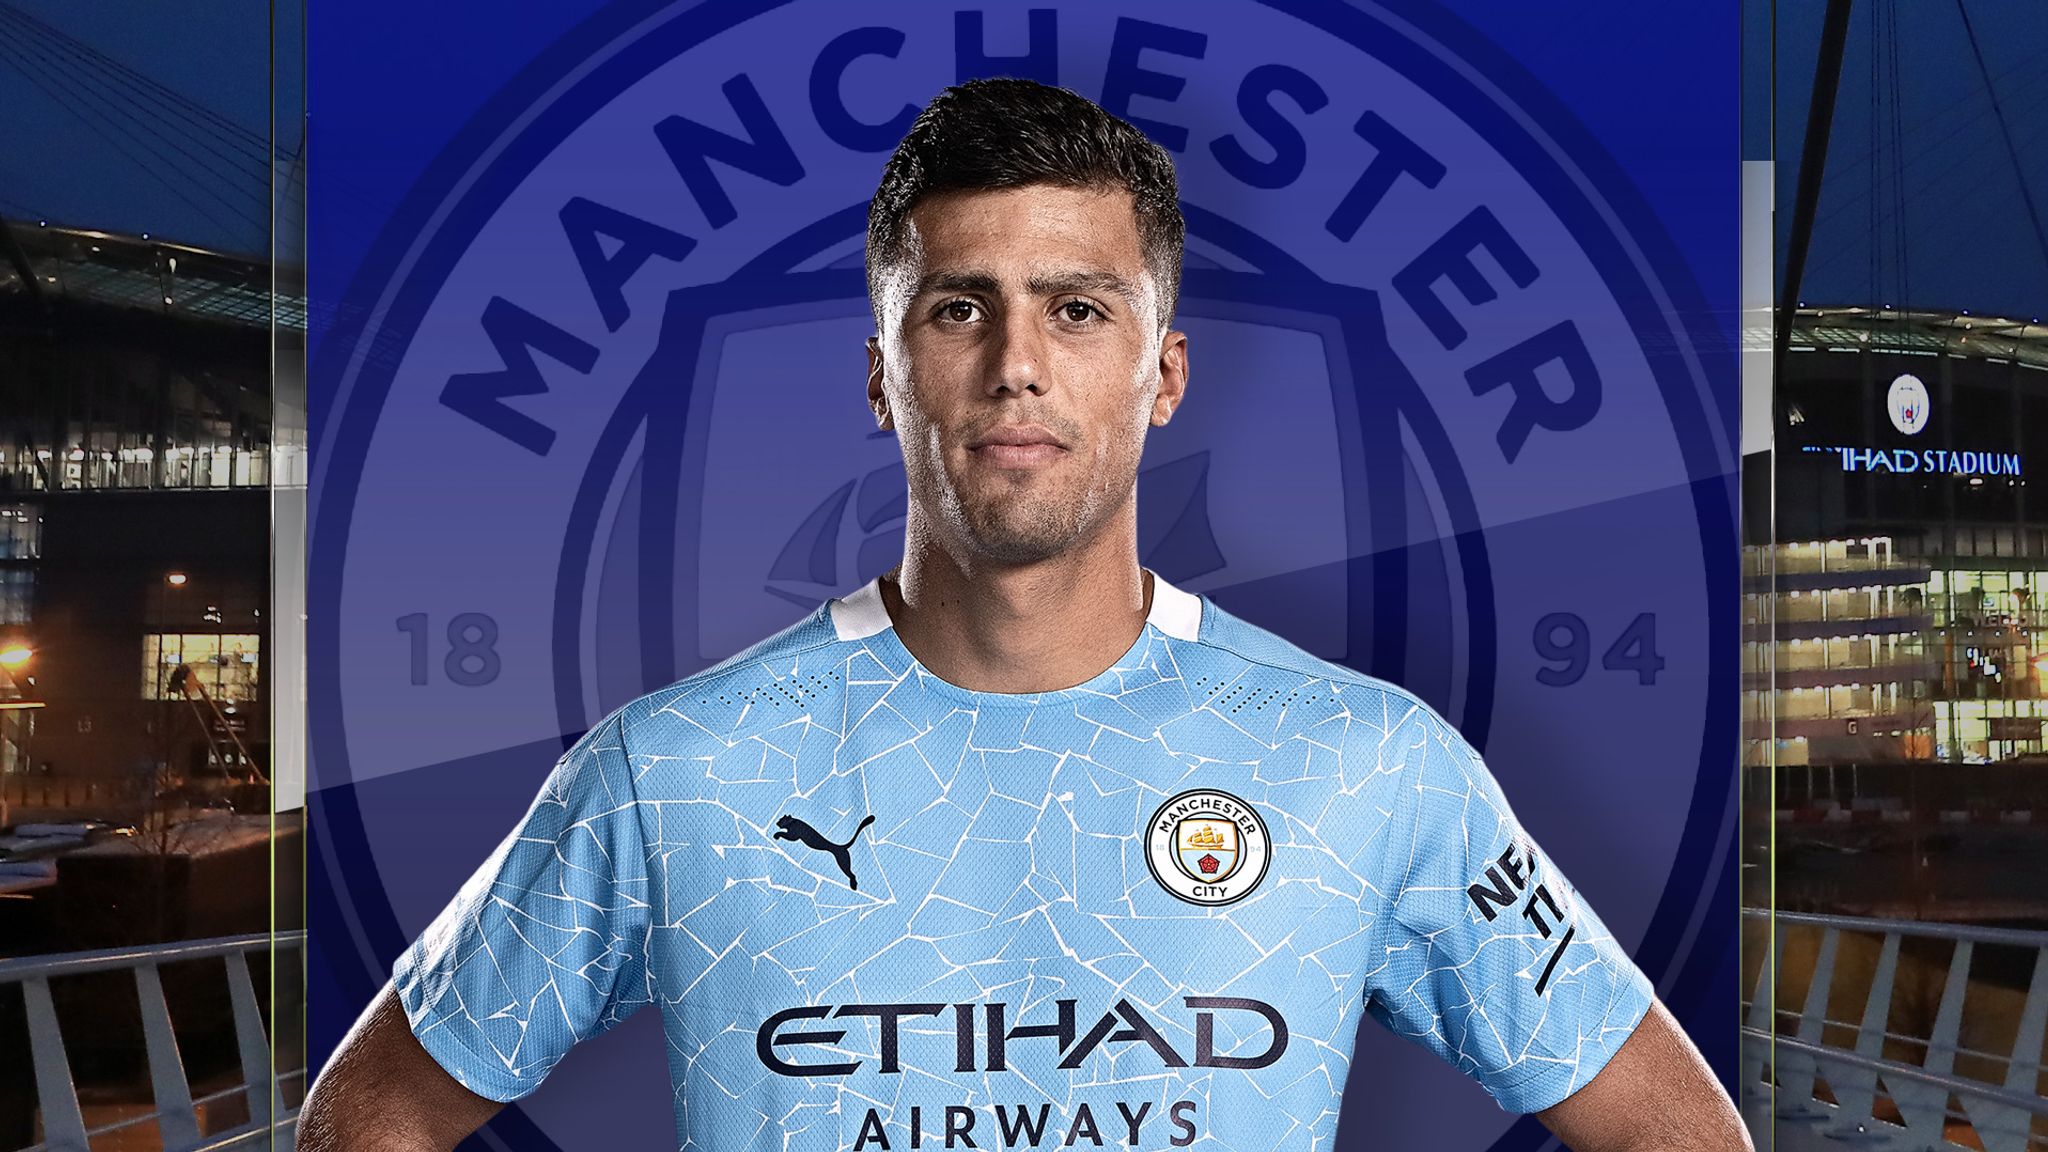  Rodri, a Spanish professional footballer who plays as a defensive midfielder for Premier League club Manchester City and the Spain national team, poses in the Etihad Stadium.